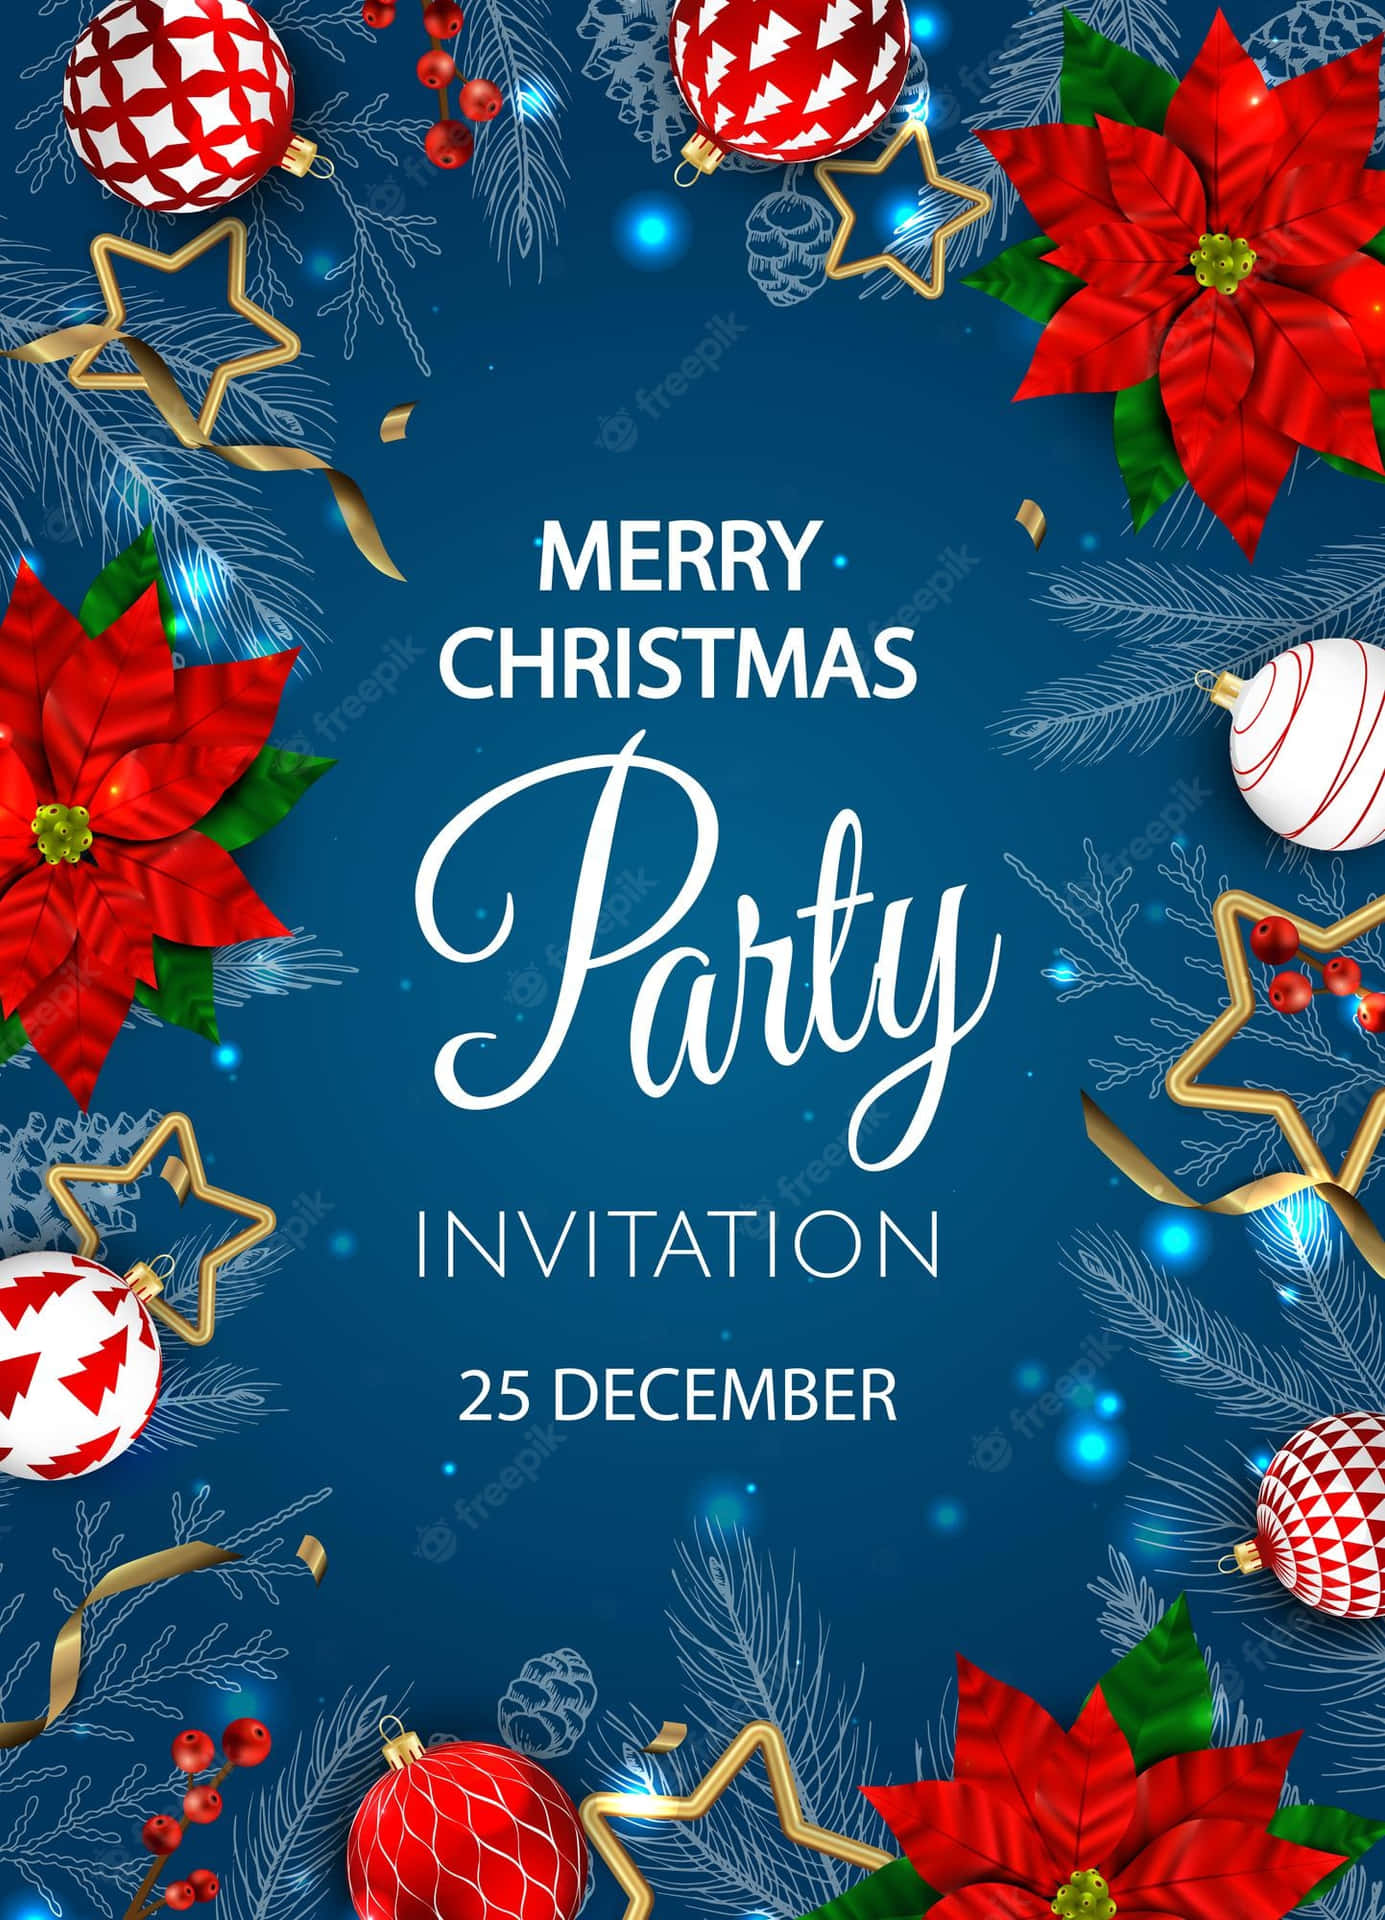 Christmas Party Invitation Template With Red And White Decorations